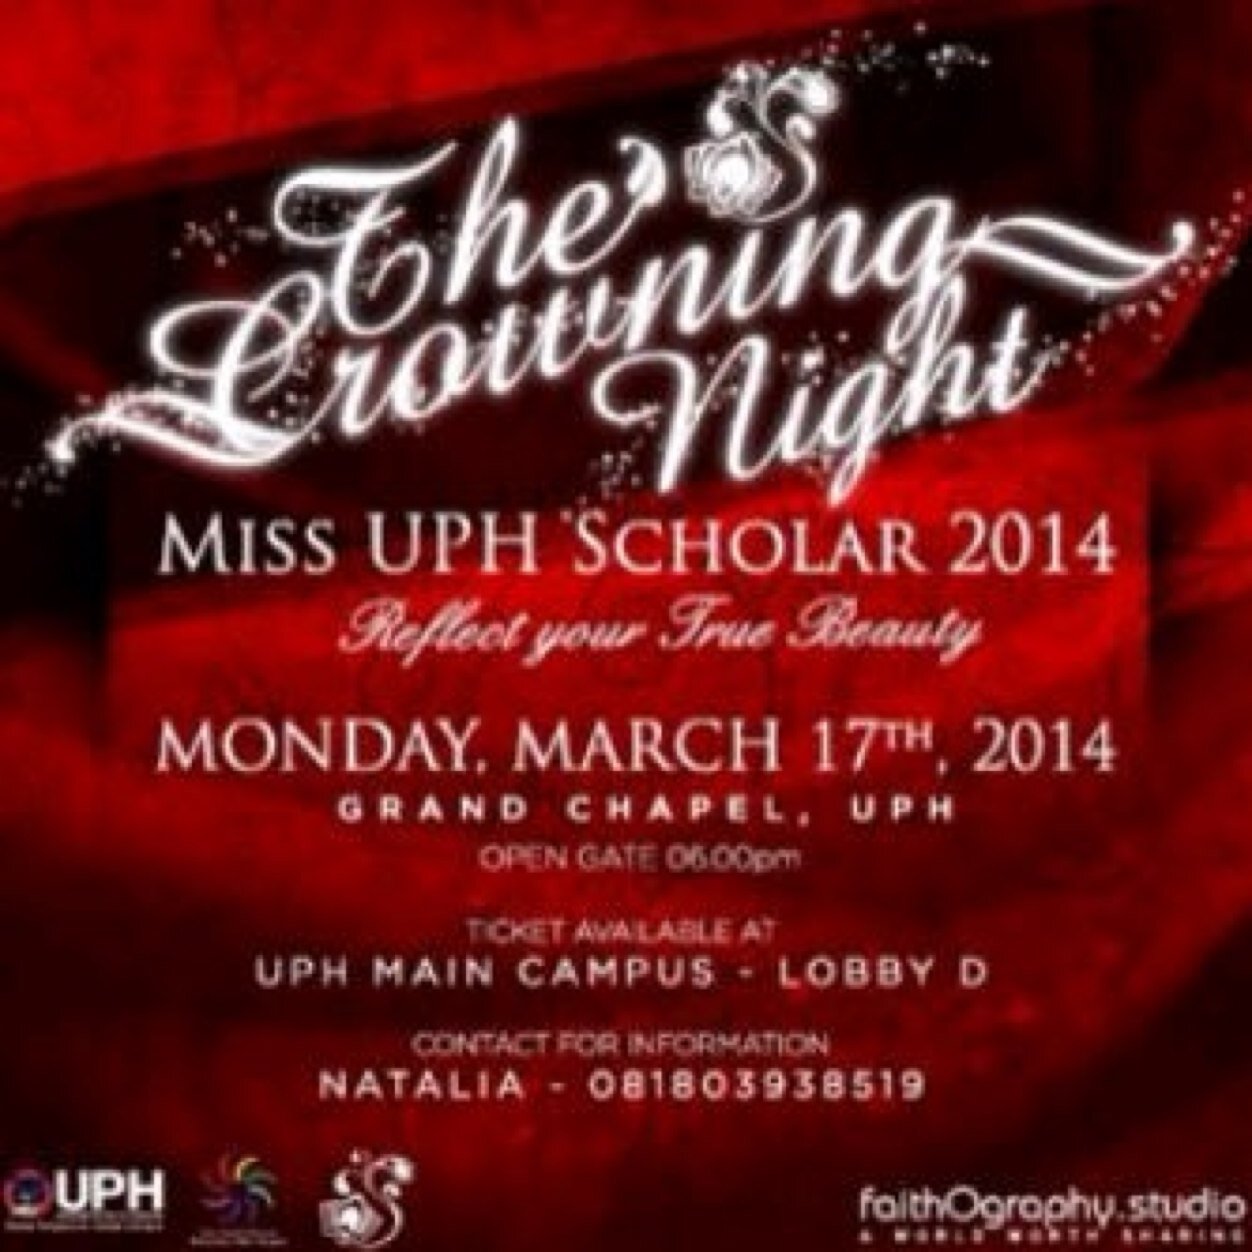 The official Twitter account of MUS 2014, Miss UPH Scholar 2014 Reflect Your True Beauty